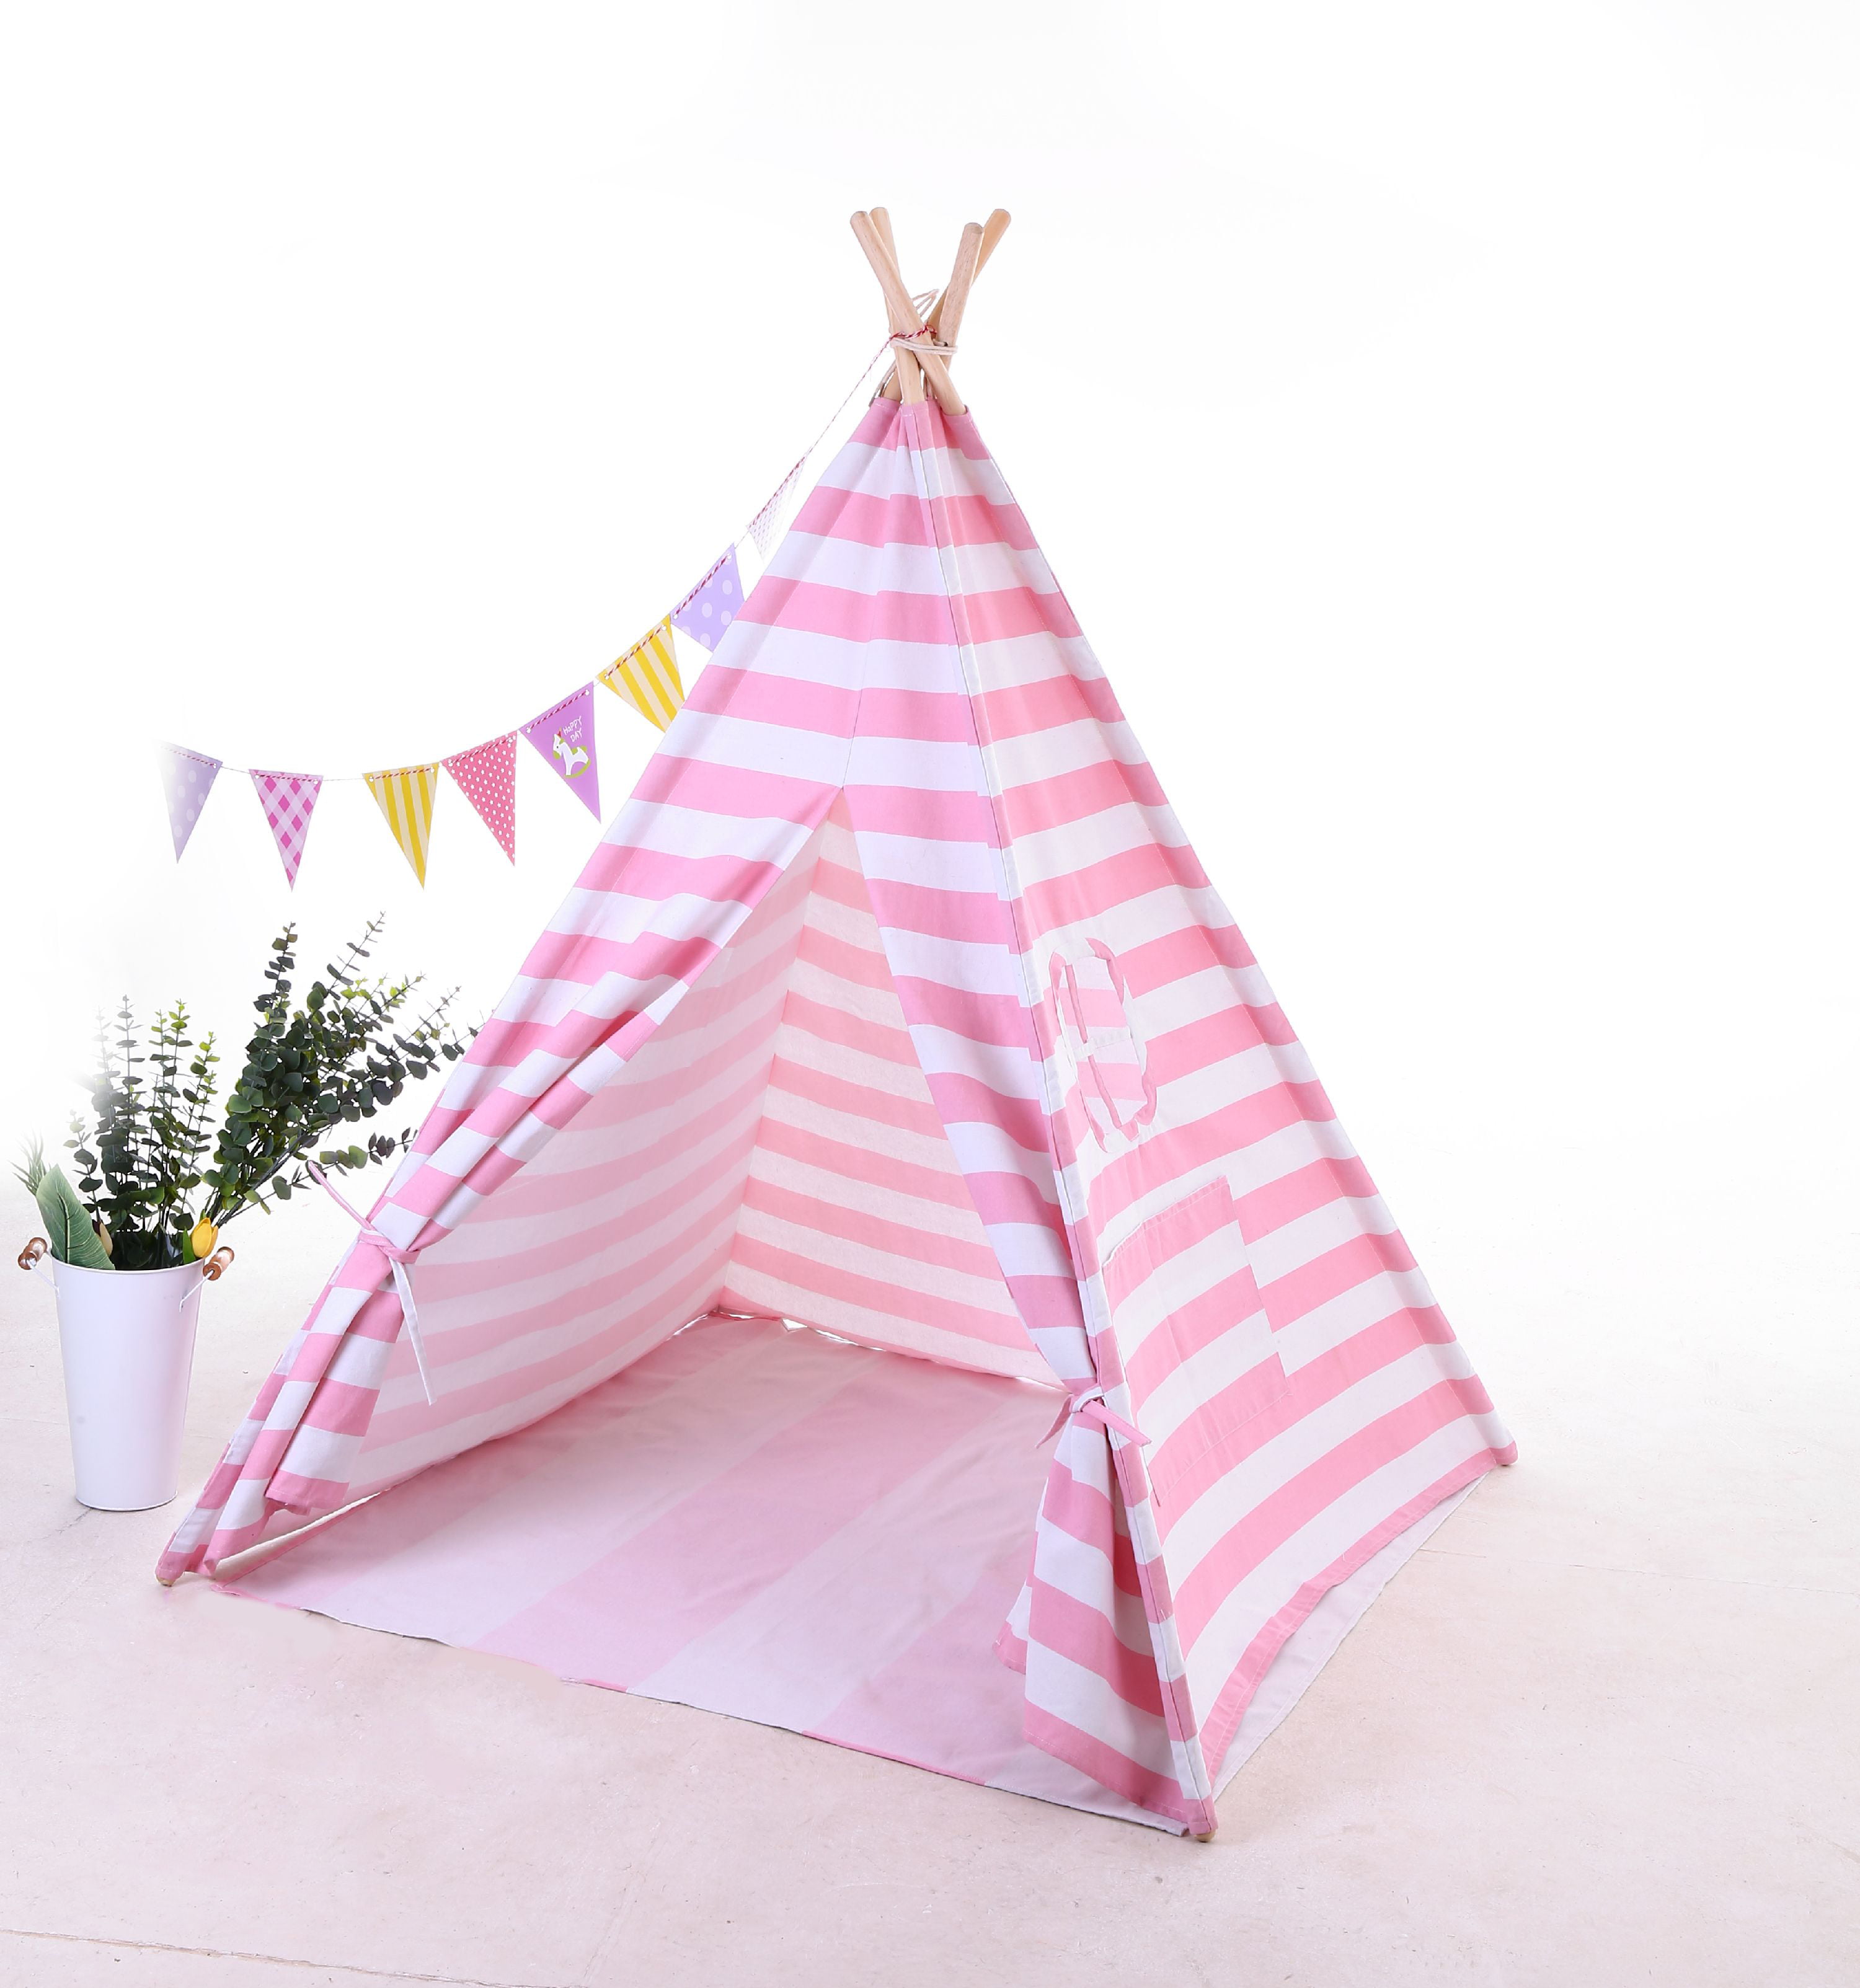 Kids Indian Teepee Play Tent for Outdoor/Indoor Foldable Playhouse Toy Toddler 